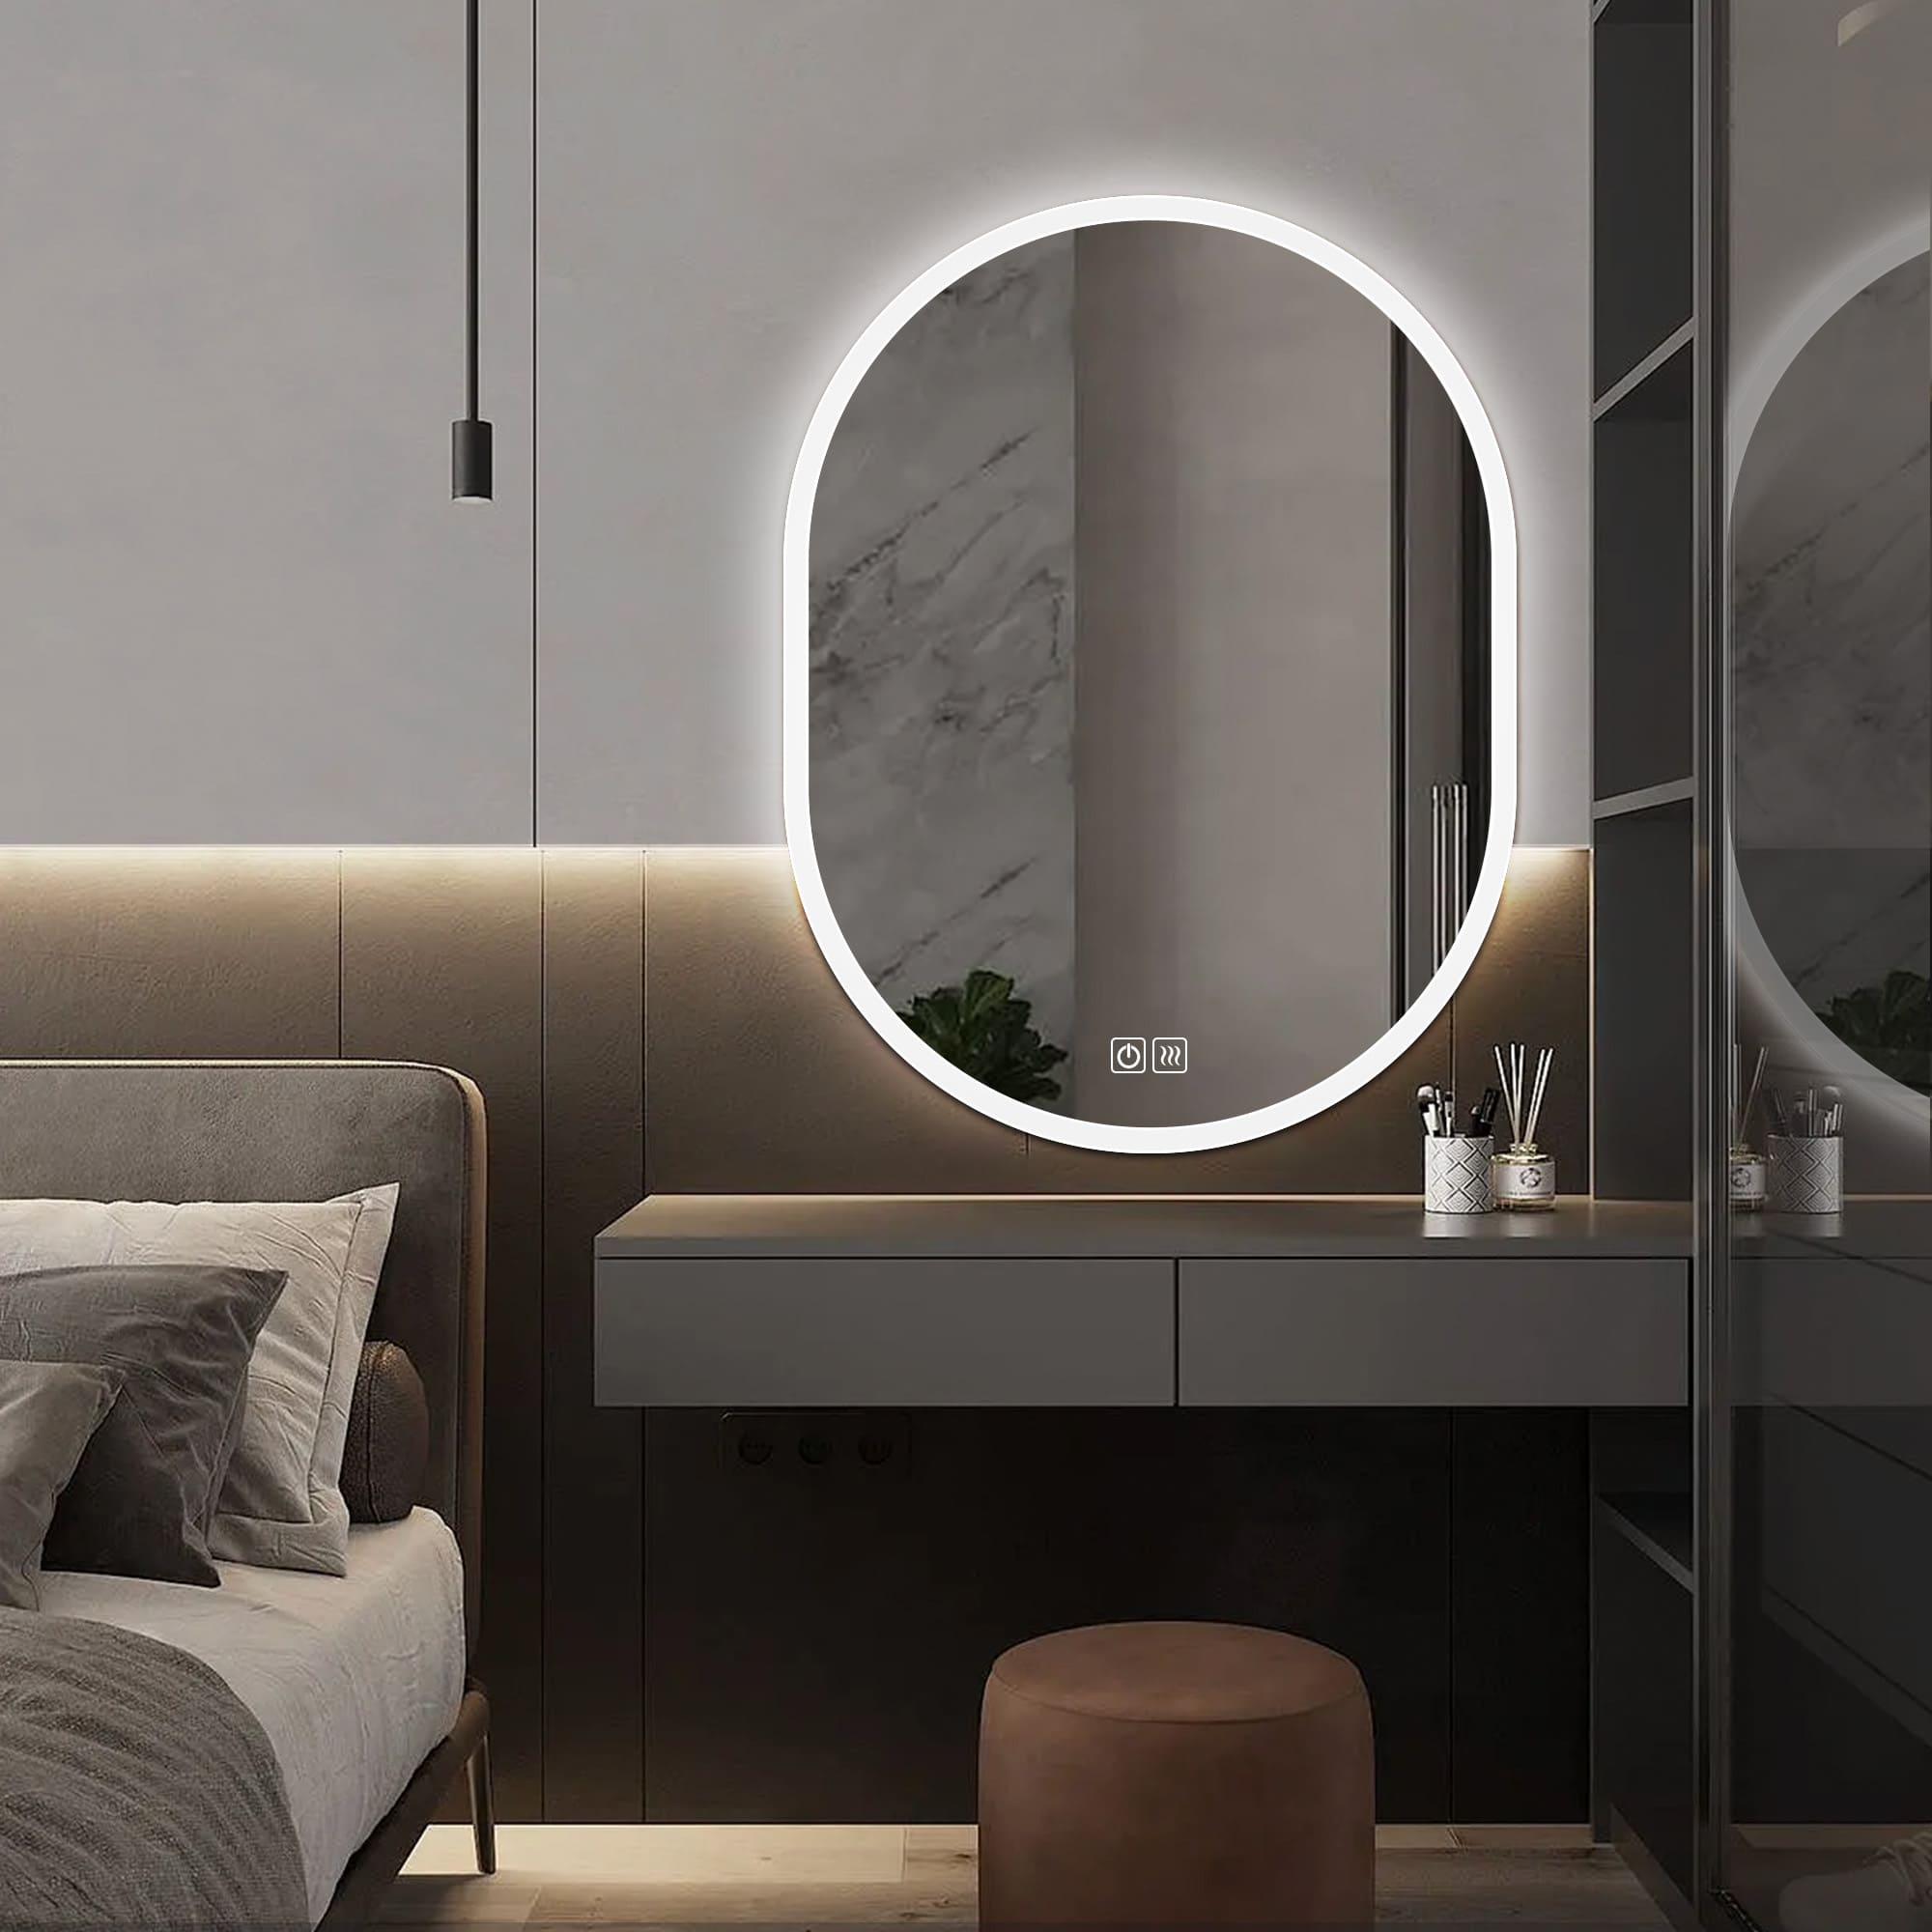 Haumea LED Mirror for bedroom